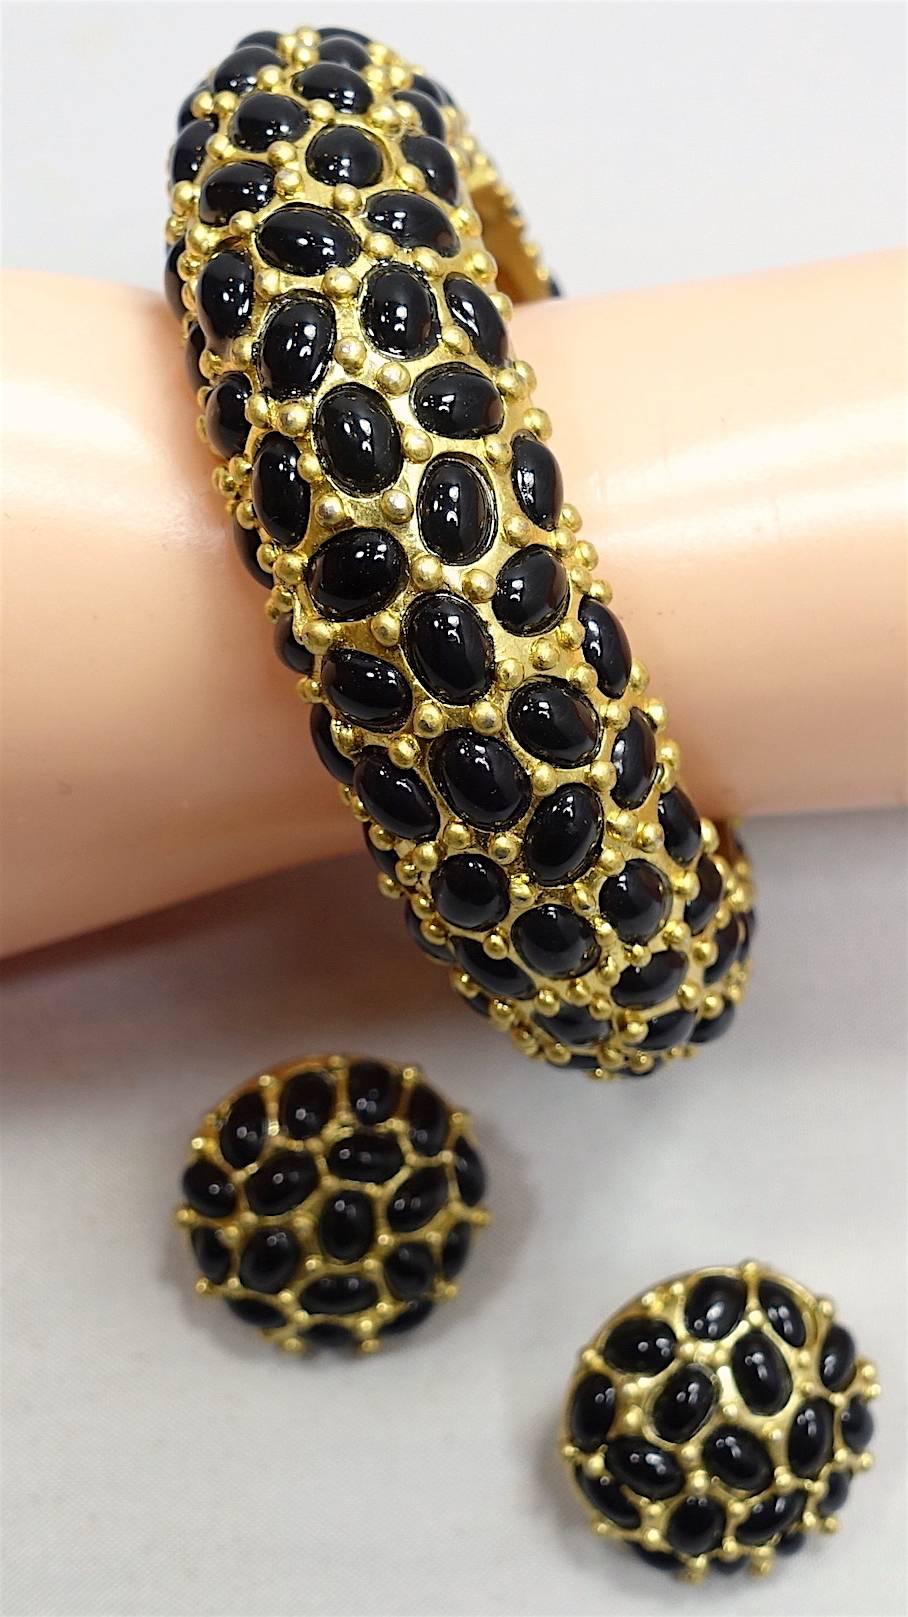 This Kenneth Lane set goes with anything and features black cabochon stones in a gold tone setting. The clamper bracelet measures 9” x 1”; the clip earrings measure 1” x 1”. This set is signed “Kenneth Lane” and is in excellent condition.